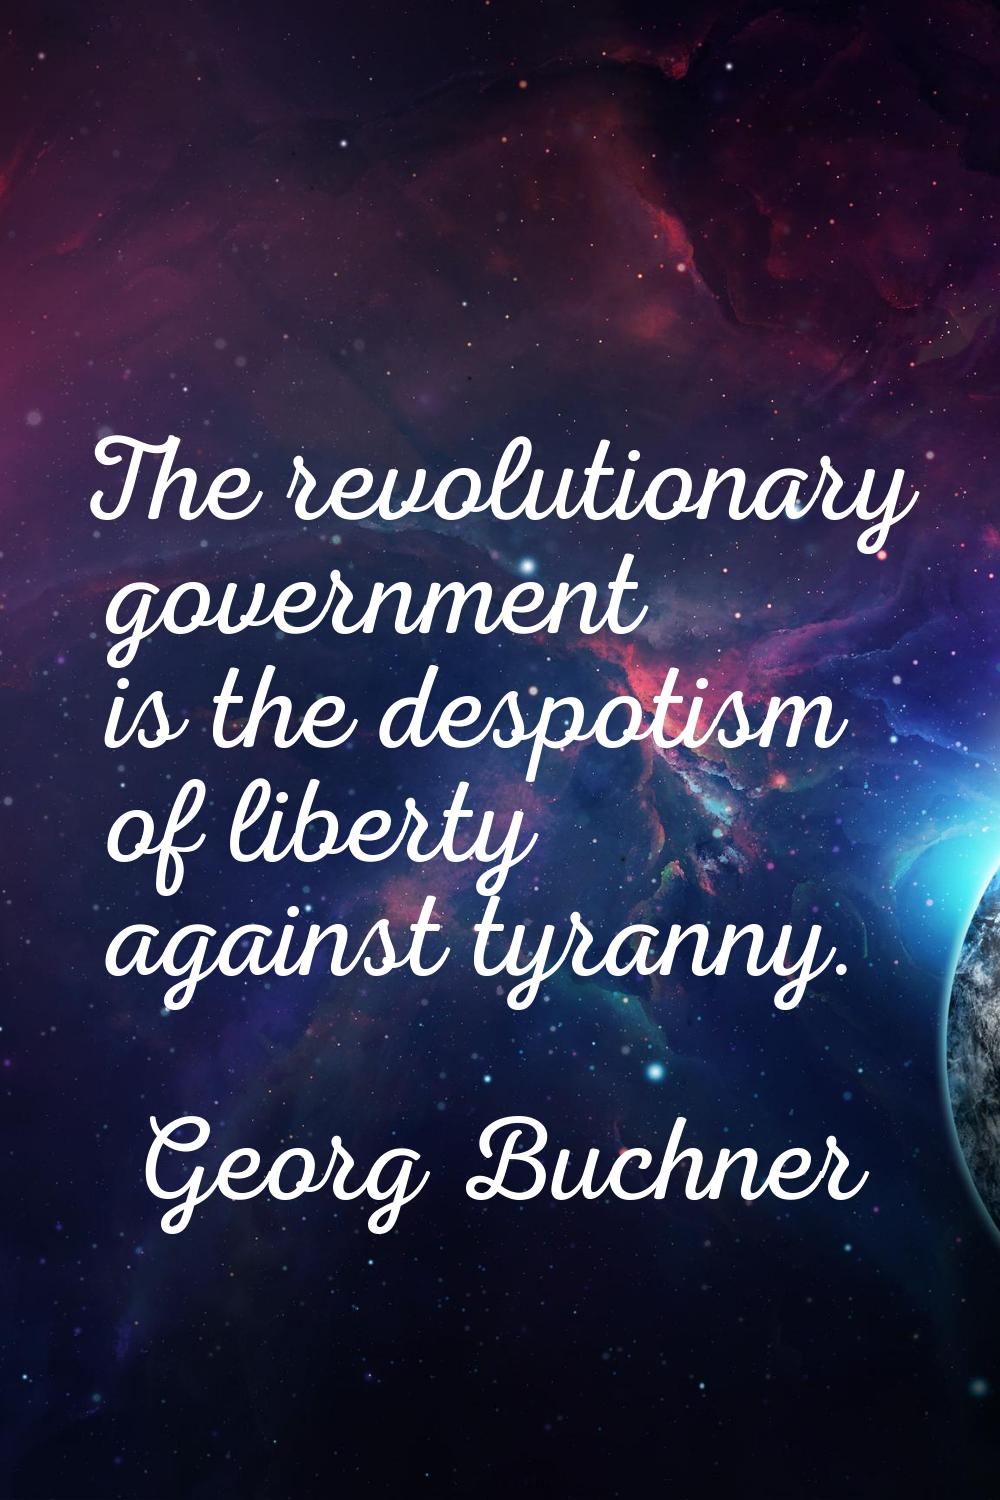 The revolutionary government is the despotism of liberty against tyranny.